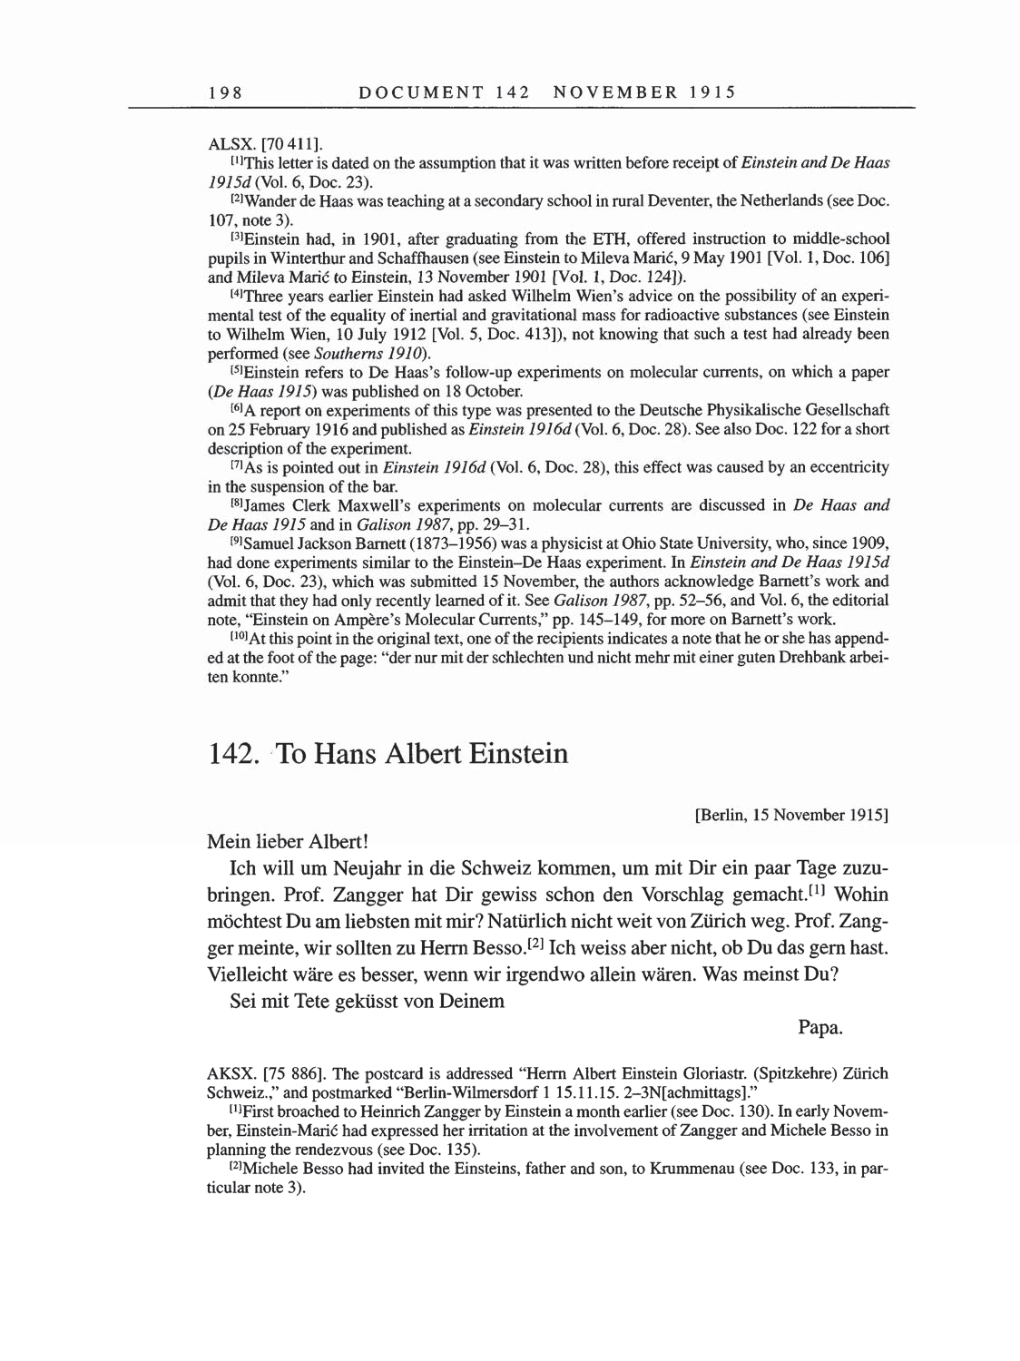 Volume 8, Part A: The Berlin Years: Correspondence 1914-1917 page 198